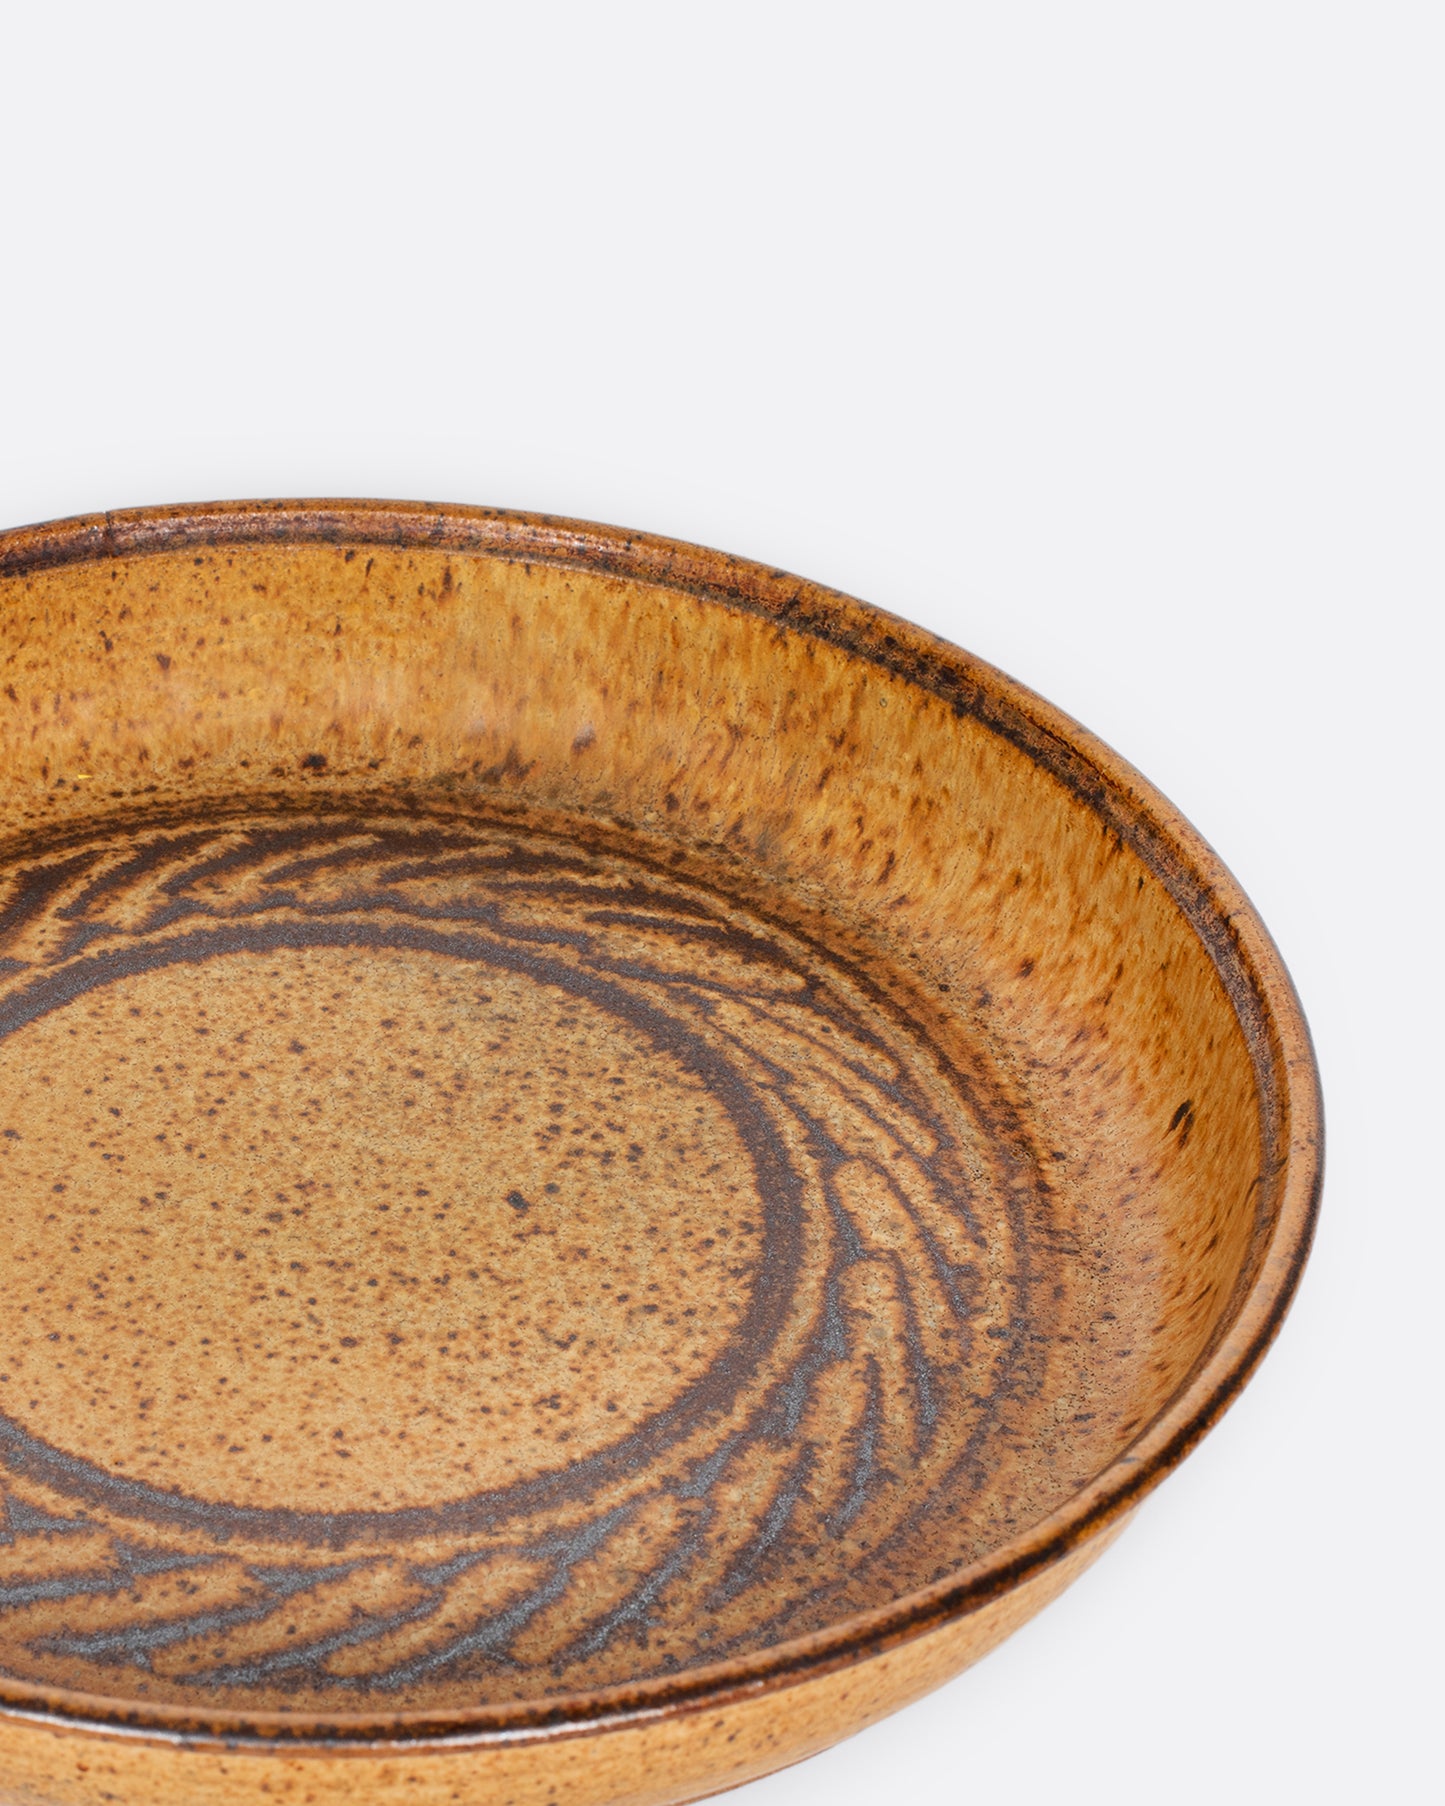 A vintage studio-made ceramic serving platter of generous size, with a swirling center design.